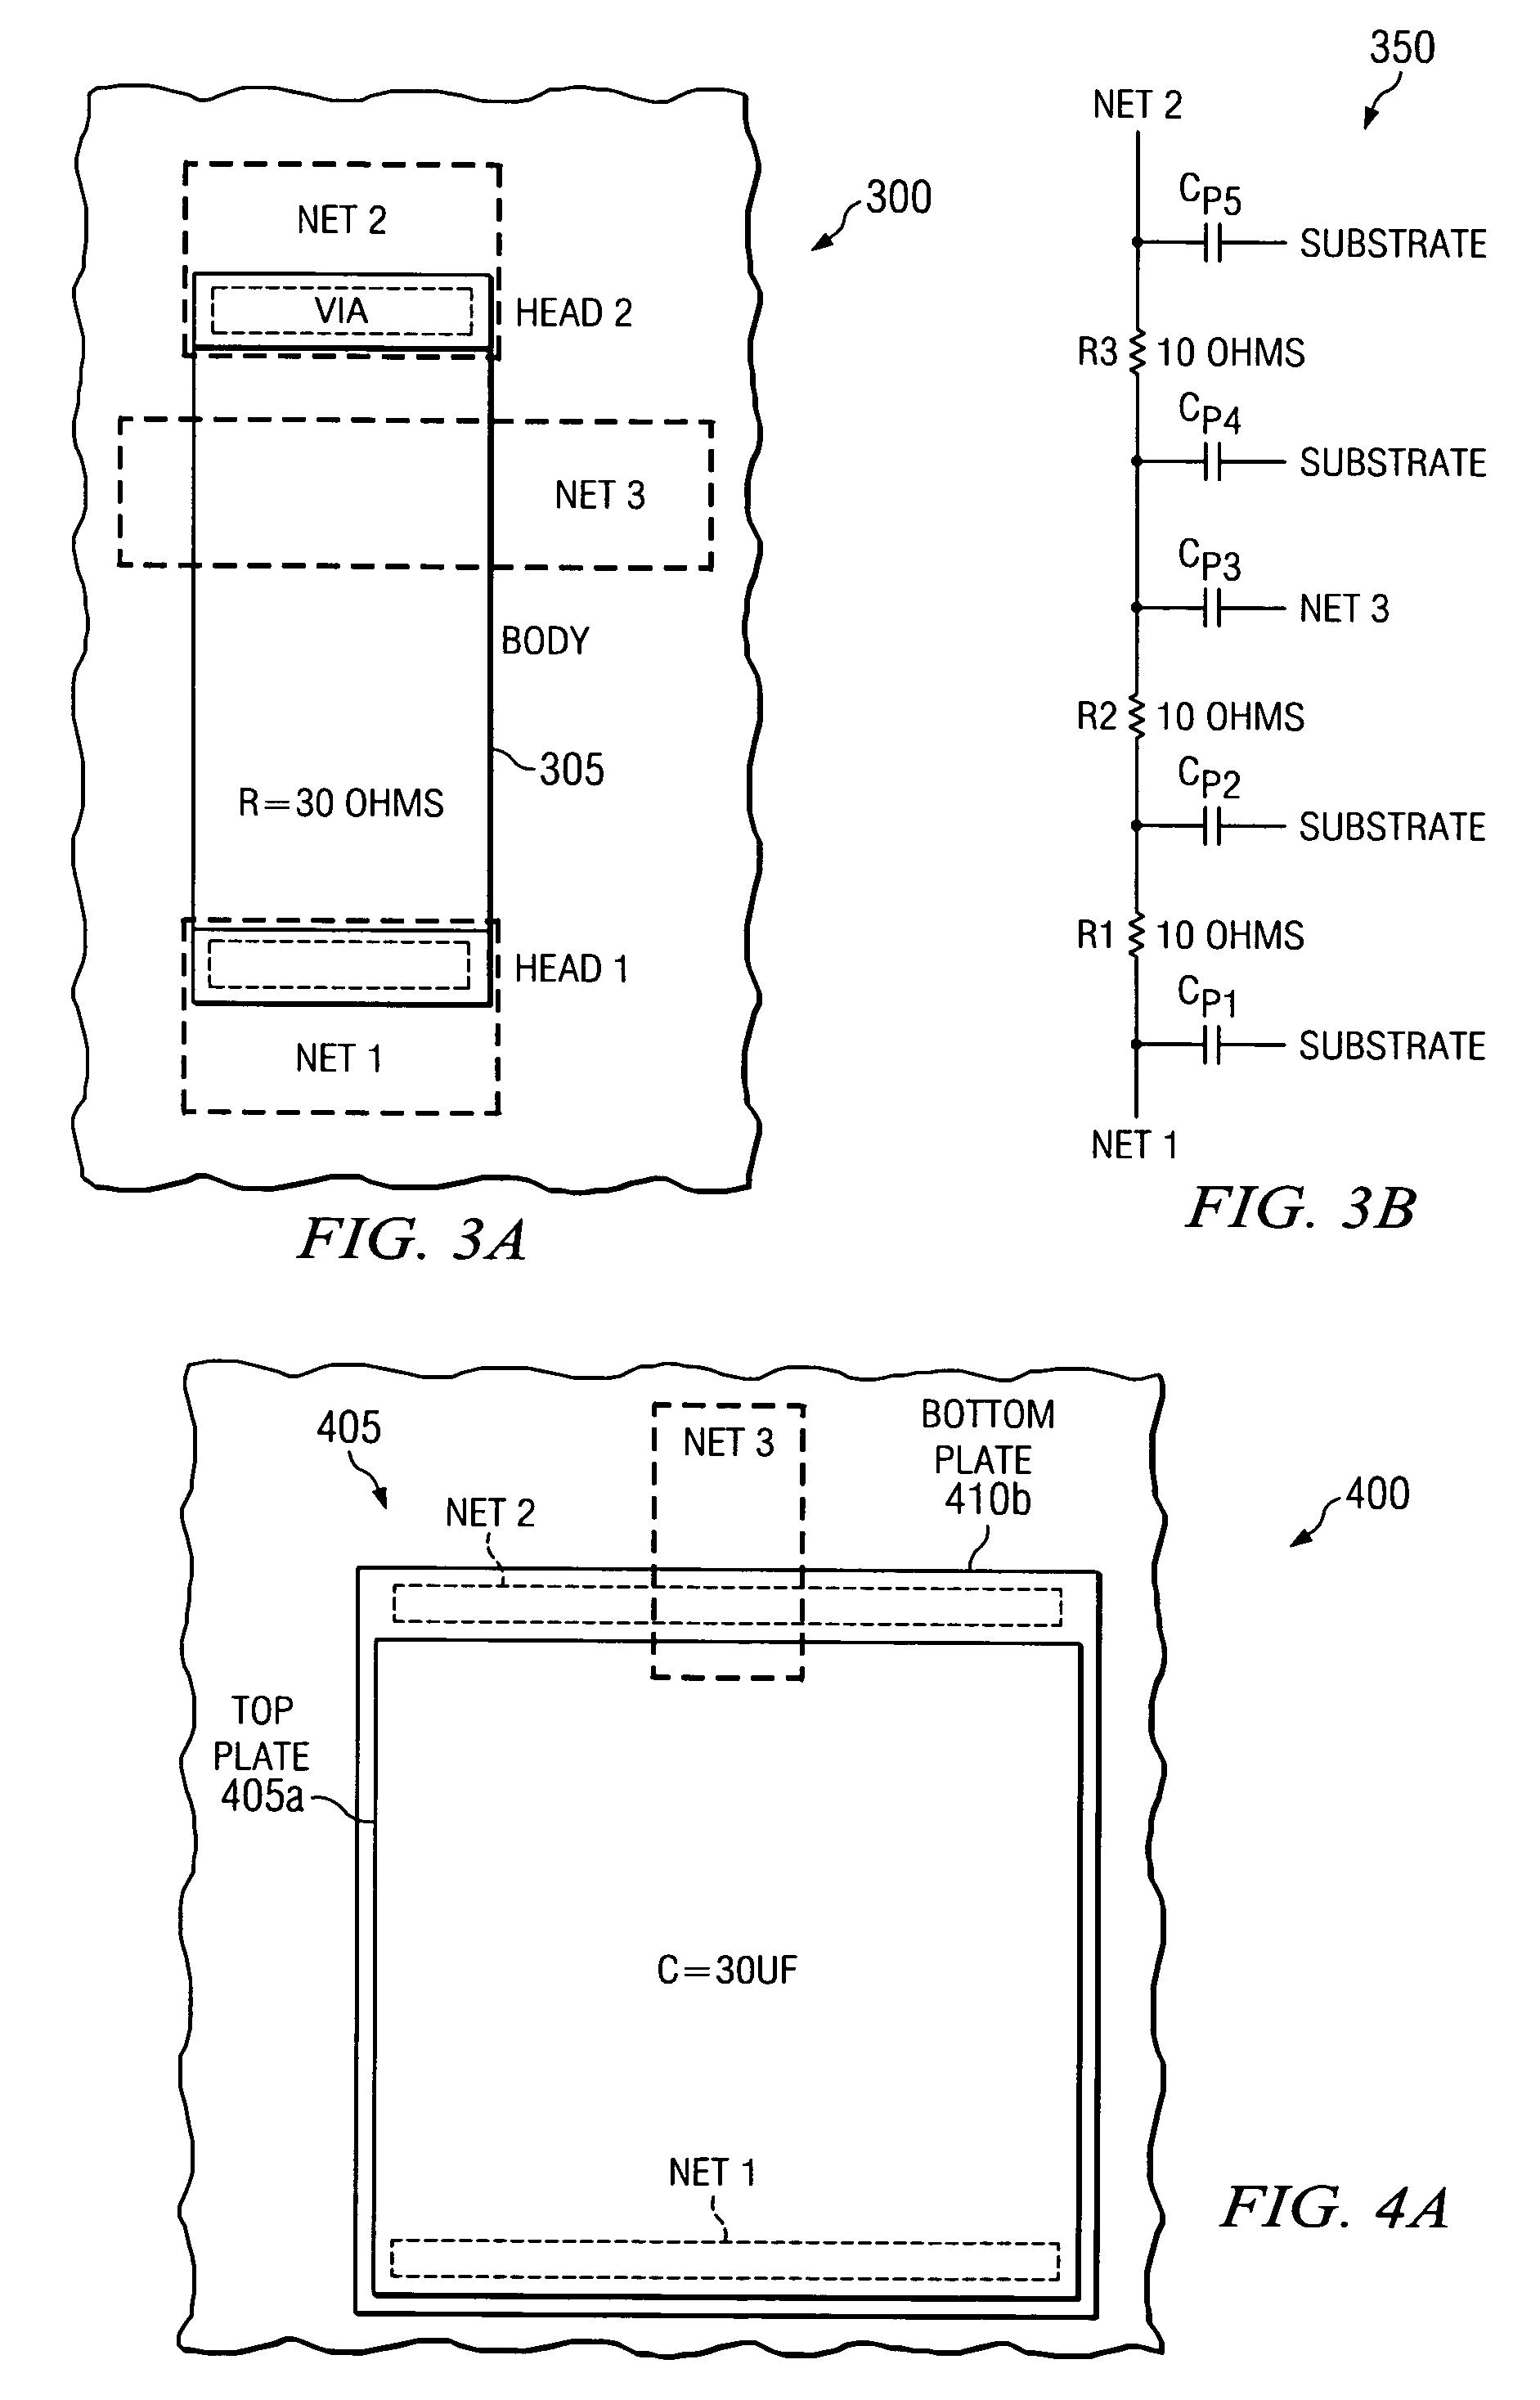 Distributed element generator, method of generating distributed elements and an electronic design automation tool employing the same